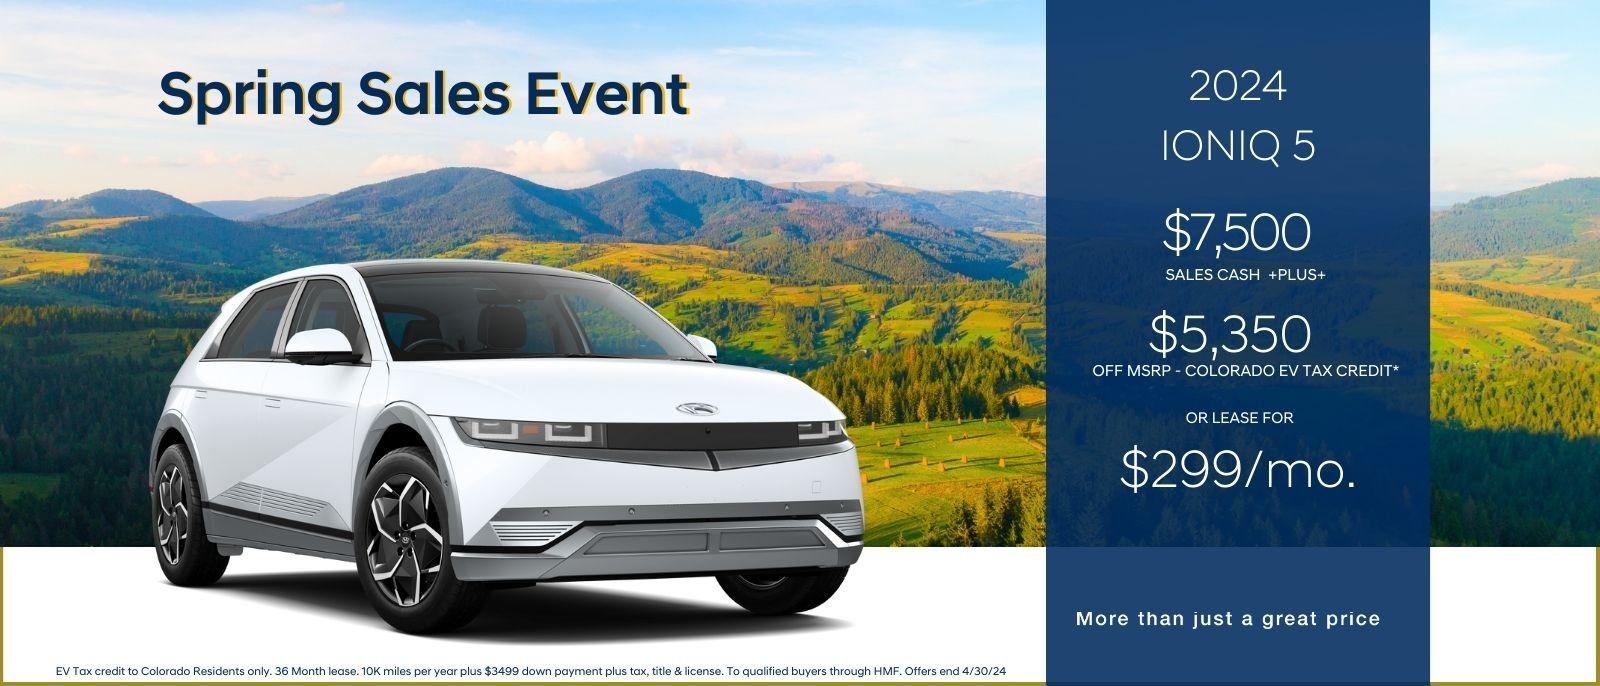 Spring Sales Event 
2024 Ioniq 5
$7,500 sales cash plus $5,350 off MSRP 
or lease for $299/mo

more than just a great price